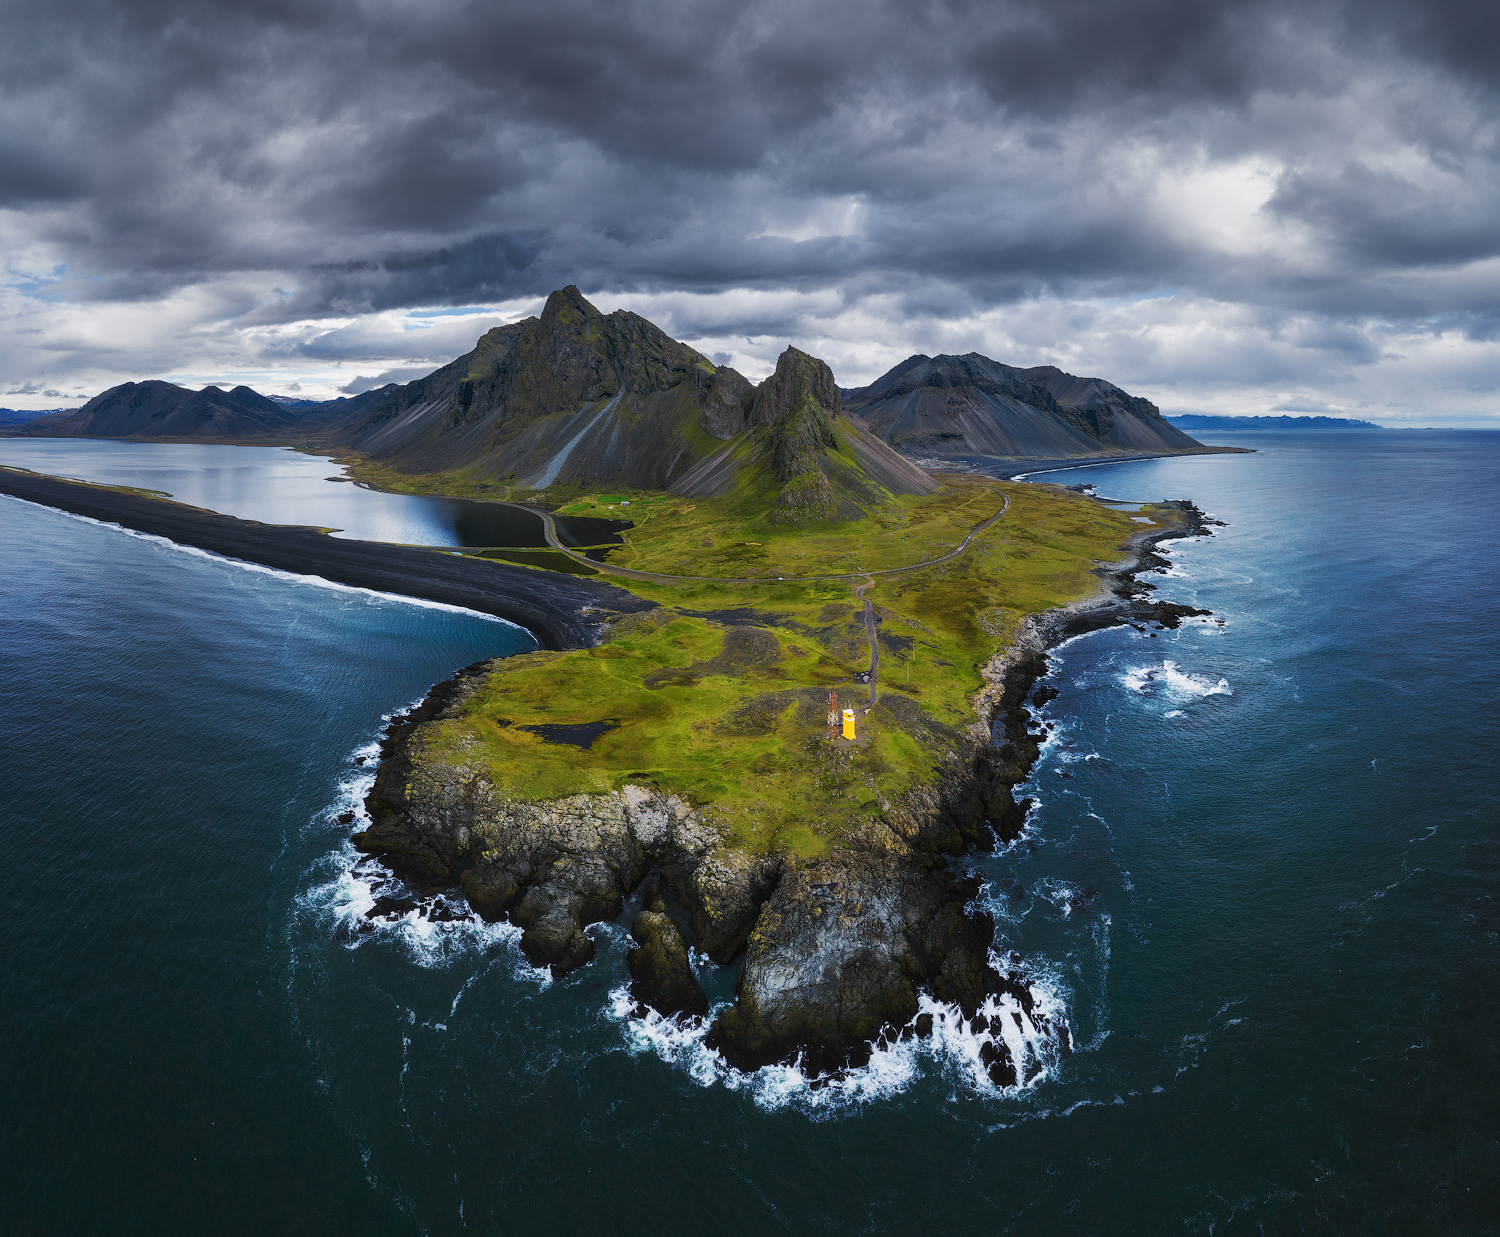 What Are Rules For Flying a Drone Iceland? | Iceland Photo Tours